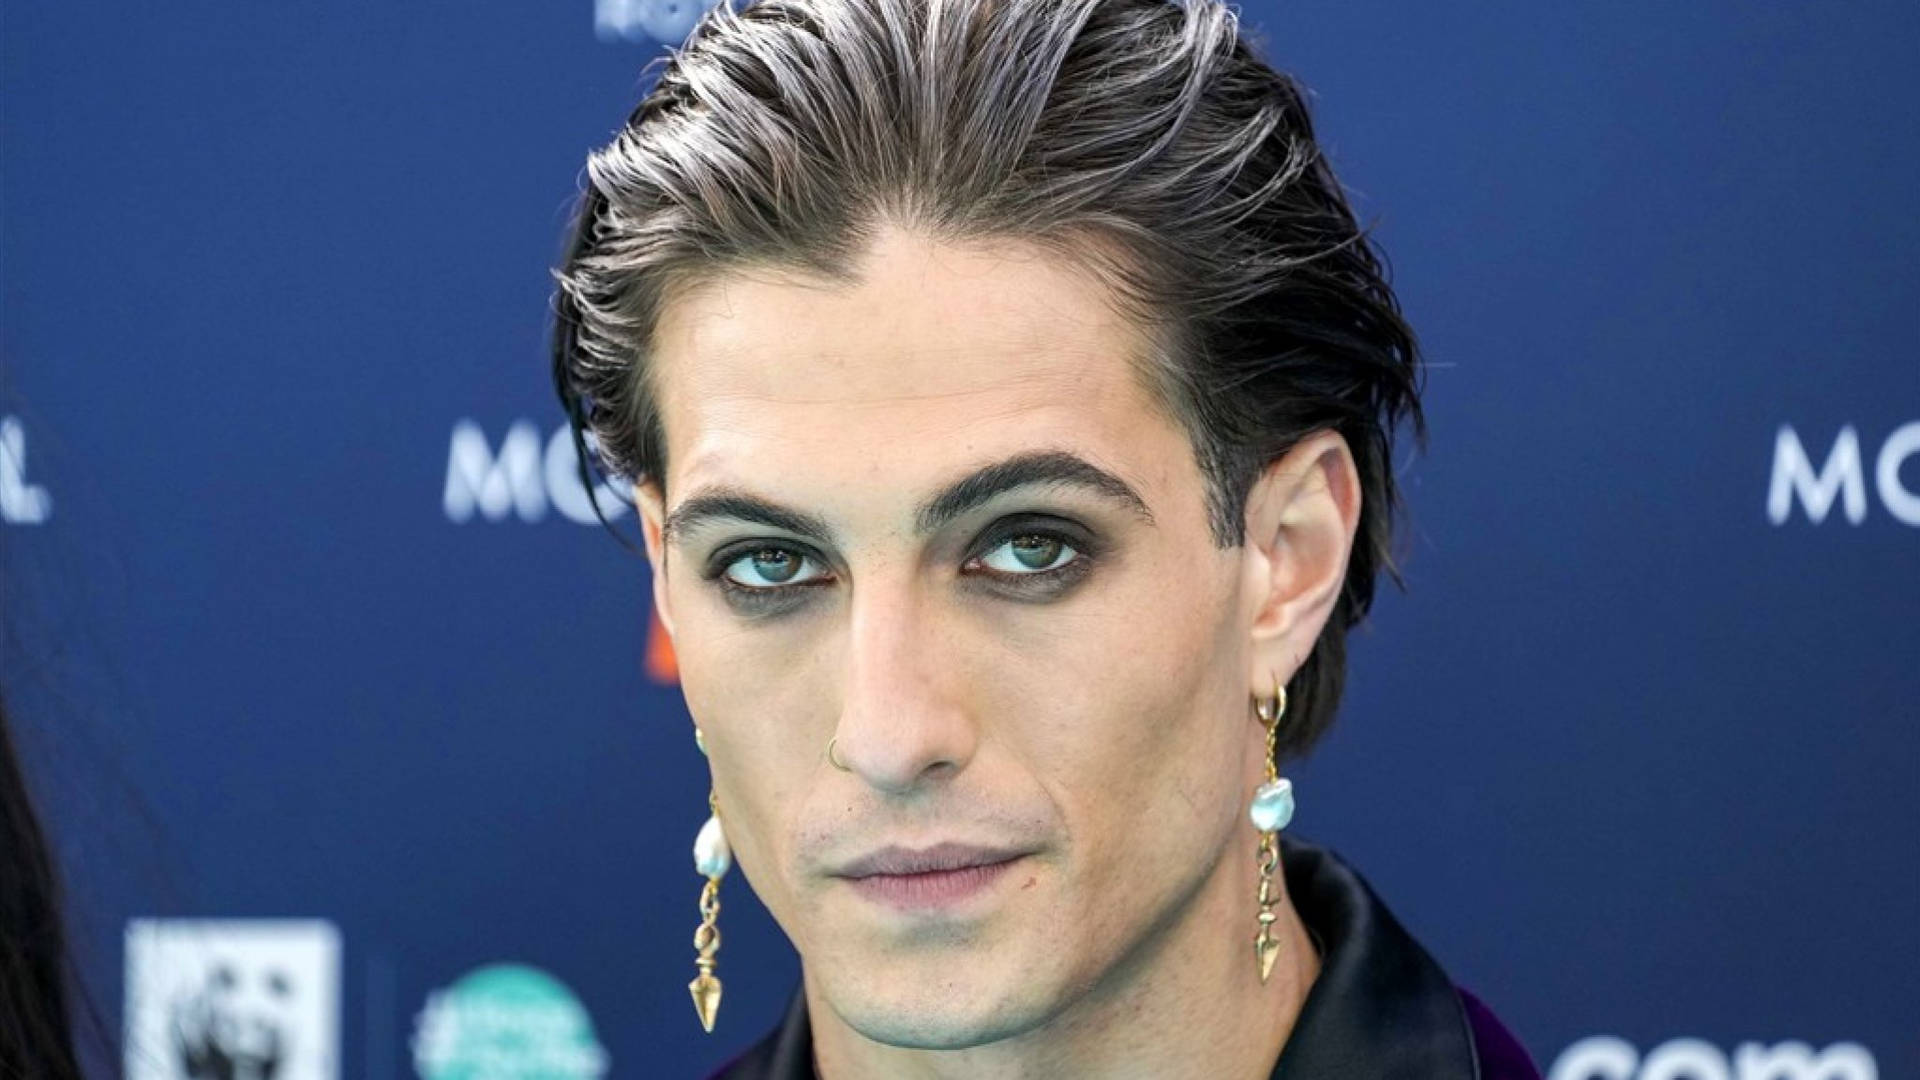 Maneskin Vocalist Damiano With Dangling Earring